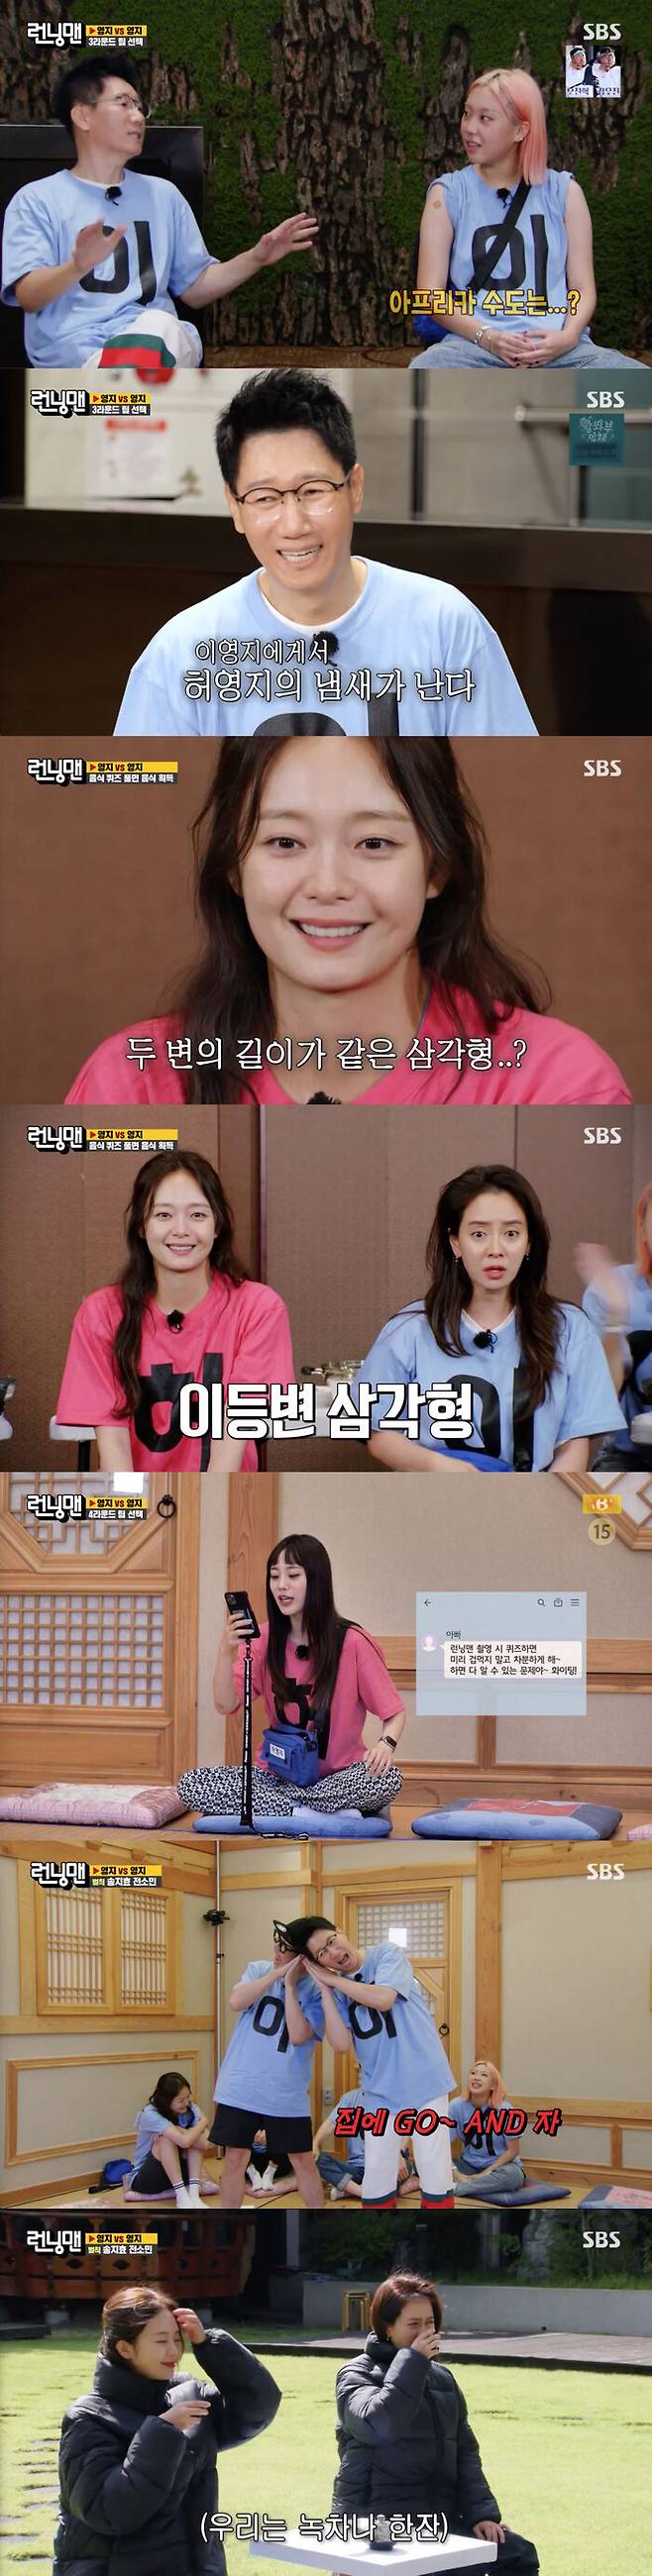 The projector and the bruising sisters attracted attention with their charm, which was hard to cover.On SBS Running Man broadcasted on the 22nd, Lee Young and Heo Young performed Gongji VS Gingji race with the members.On this day, Heo Young laughed in the face of still being a hunk after the last broadcast.And Lee Young also laughed as much as Heo Young.Lee Young asked Ji Suk-jin for the capital of Africa in preparation for the quiz, and Ji Suk-jin was embarrassed, saying, Africa is a continent.And Ji Suk-jin asked Lee Young where the capital of the Netherlands is.Lee Young then turned to say: Neterlands now have a lot of kangaroo, a good panoramic and greasy food.And when he hinted at the capital of Malaysia, Lee Young gave an absurd answer, such as Kuku rice cooker? Kuala Gusky? Kuala Lumba?In particular, Lee Young, prior to the quiz showdown, Italian capital is Paris, Malaysia capital is Lapura Pura and all of them were shocked.Jeon So-min reveals confidence in showdown with Song Ji-hyoHowever, when asked about the same triangle in length of the two sides, he could not take his mouth off and was defeated by Song Ji-hyo and tasted humiliation after Umbrella.Prior to the final four rounds, Heo Young released a message he received from Father.When Father is quizzing on Running Man shooting, dont be afraid in advance and calm down, its a matter of knowing everything, Fighting, he said.But I did not get a quiz today, he said.And Heo Young said, And theres a problem with Fathers words.I did not get it last time, but I did not get it, he said. Father does not know his daughter well.But the win of the day was won by the projection with Kim Jong-kook.And among the last-place nominees Haha, Ji Suk-jin, Song Ji-hyo and Jeon So-min, the bruised sisters were named as penalties.Yoo Jae-Suk said, Kwangsoo went out and I was evenly punished. Kim Jong-kook also said, Kwangsoos bang-up energy seems to have gone to the gold-handed Jihyo.